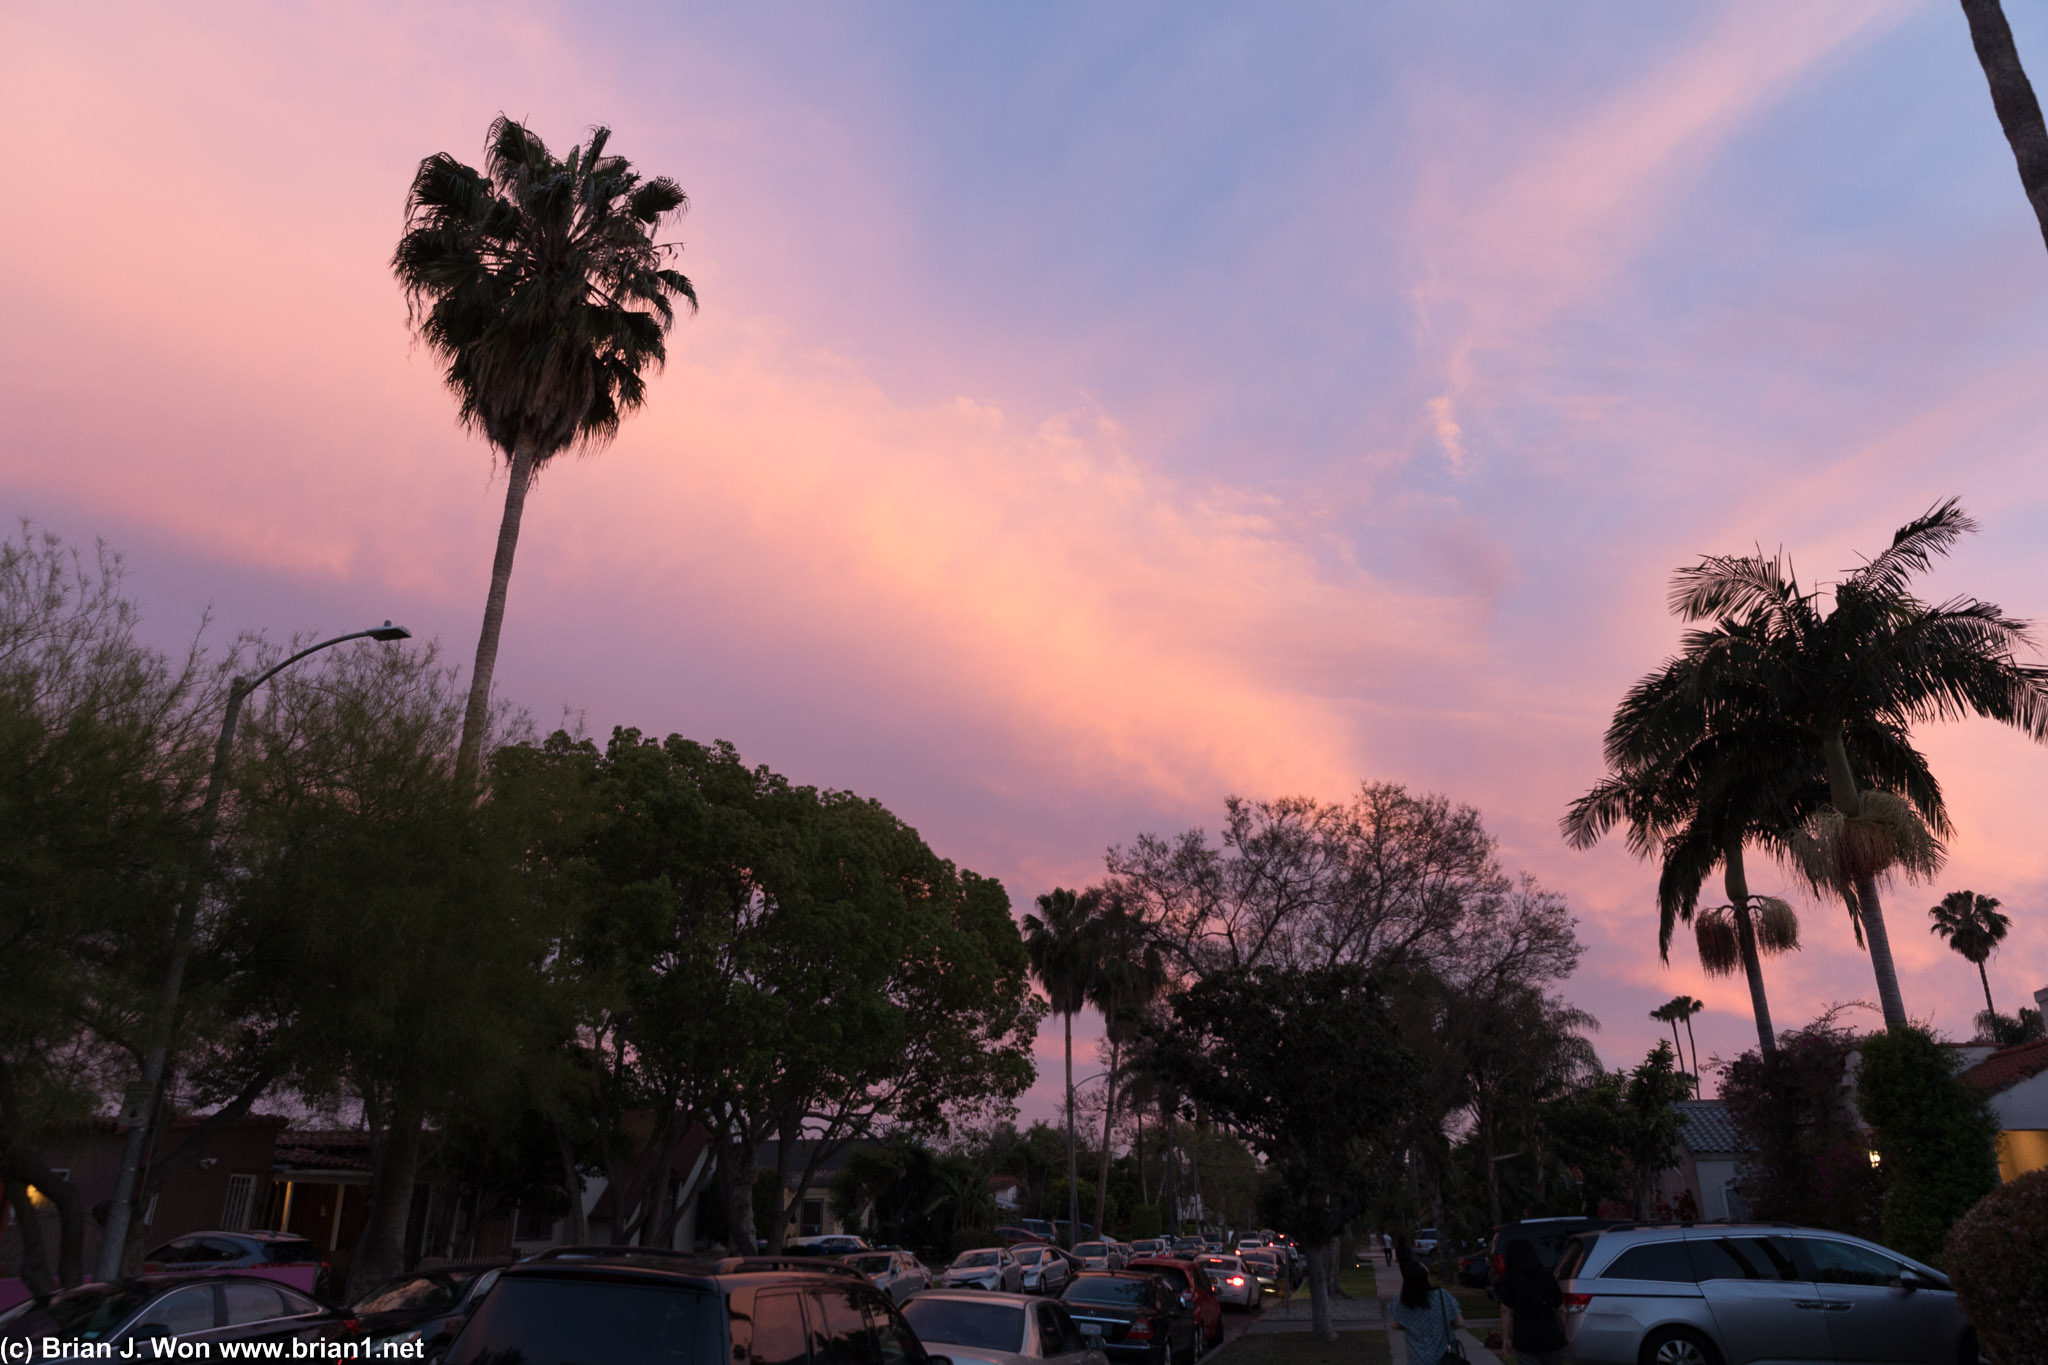 Sunset over a crowded Melrose neighborhood.